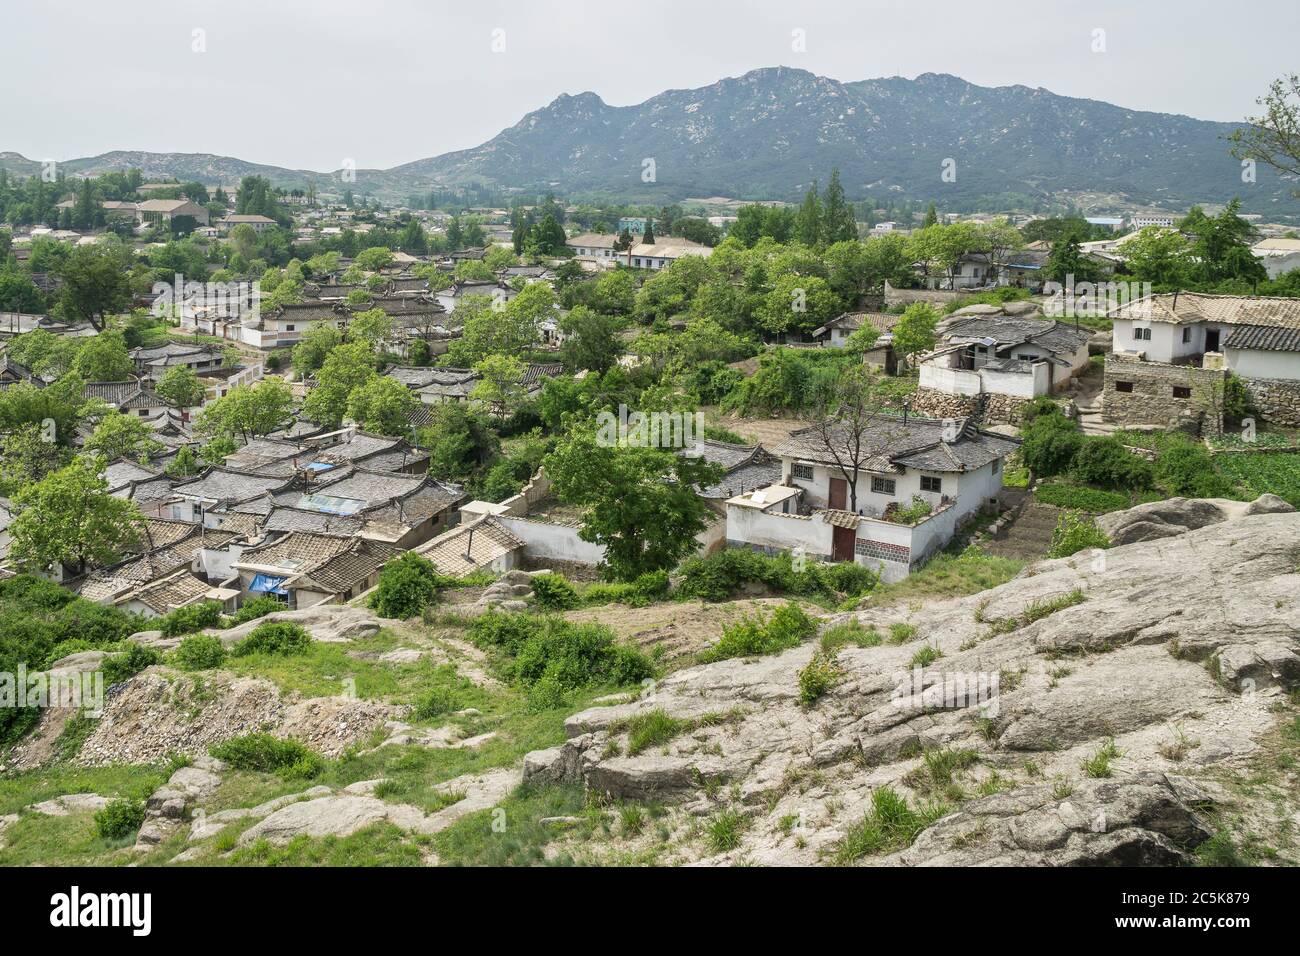 Sleeping Lady is a range of mountains that look like a woman lying on her back in Kaesong, North Korea Stock Photo